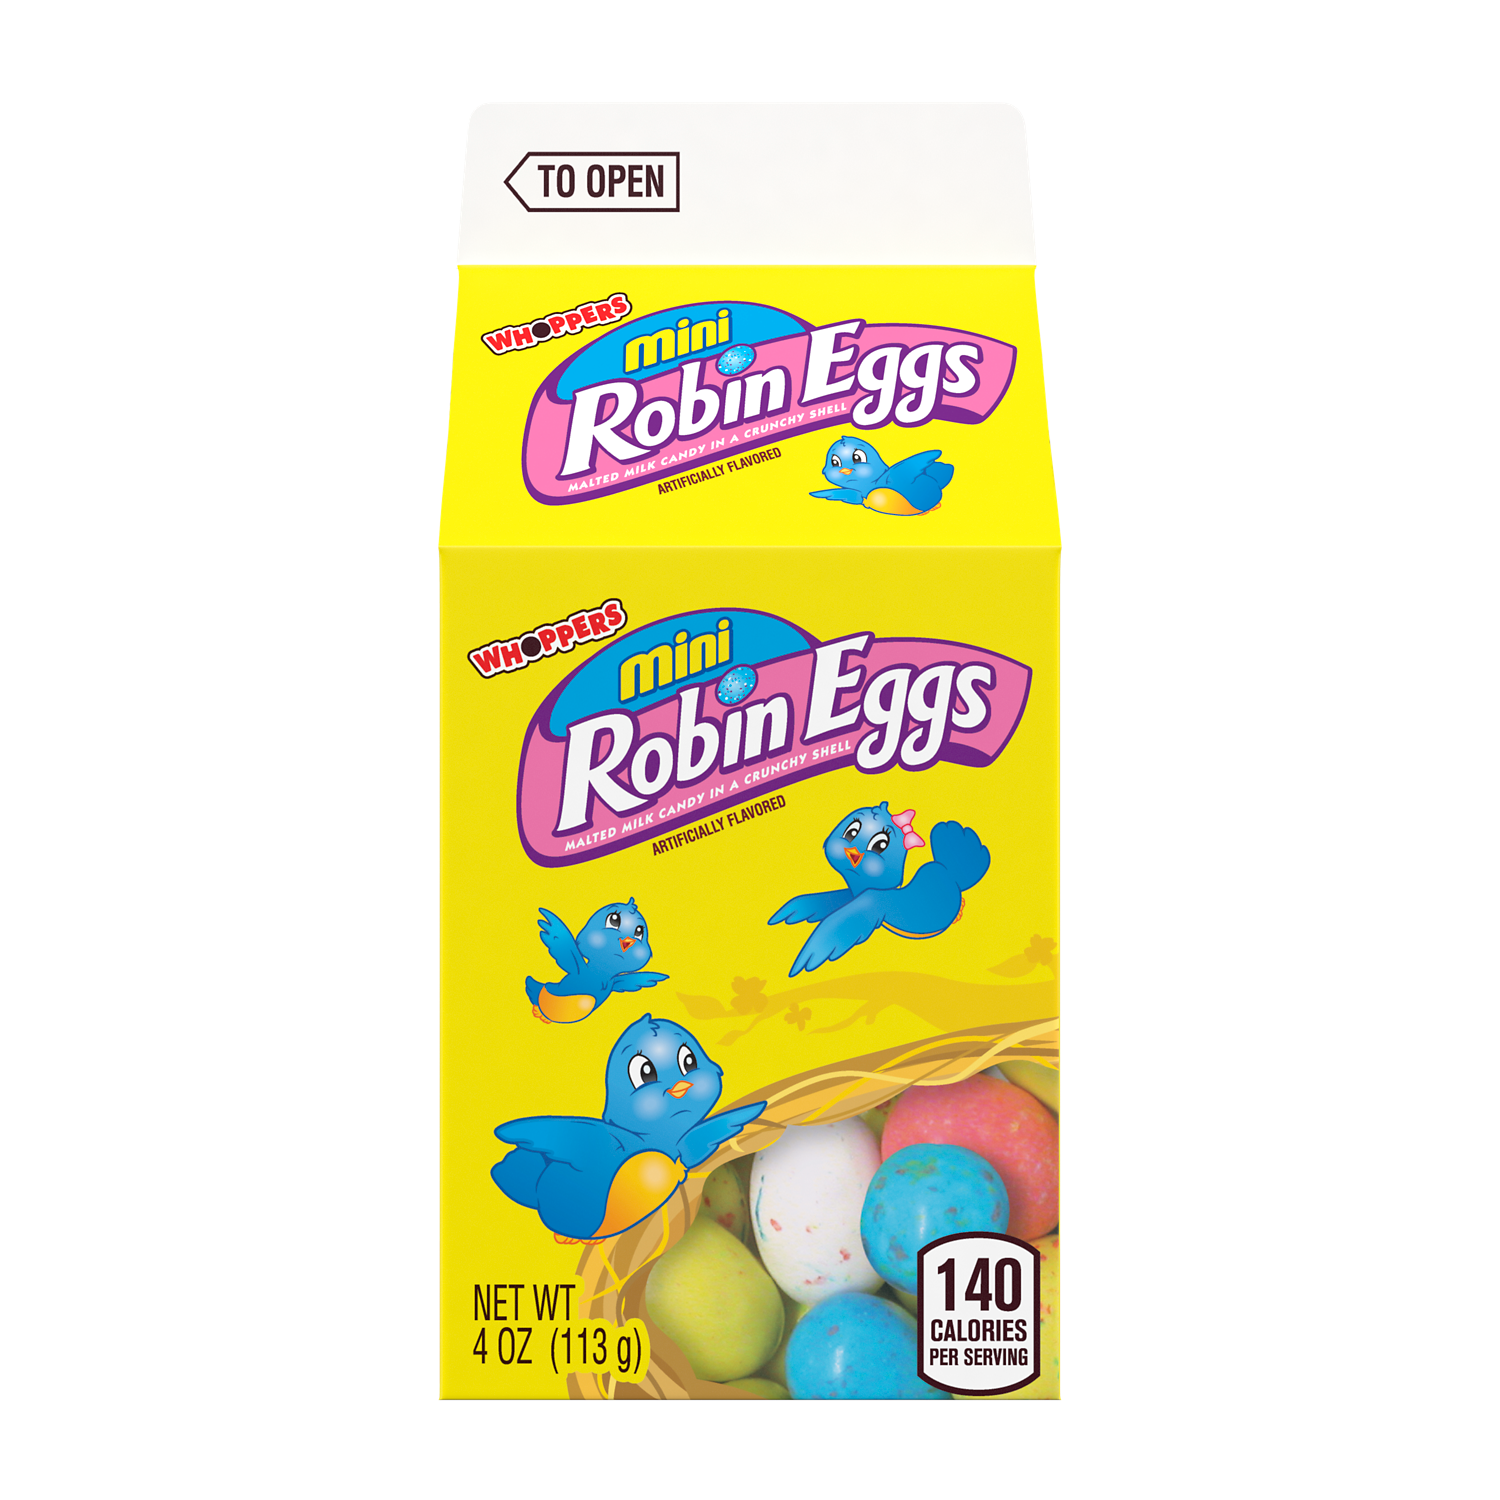 WHOPPERS ROBIN EGGS Mini Milk Chocolate Malted Milk Balls, 4 oz carton - Front of Package